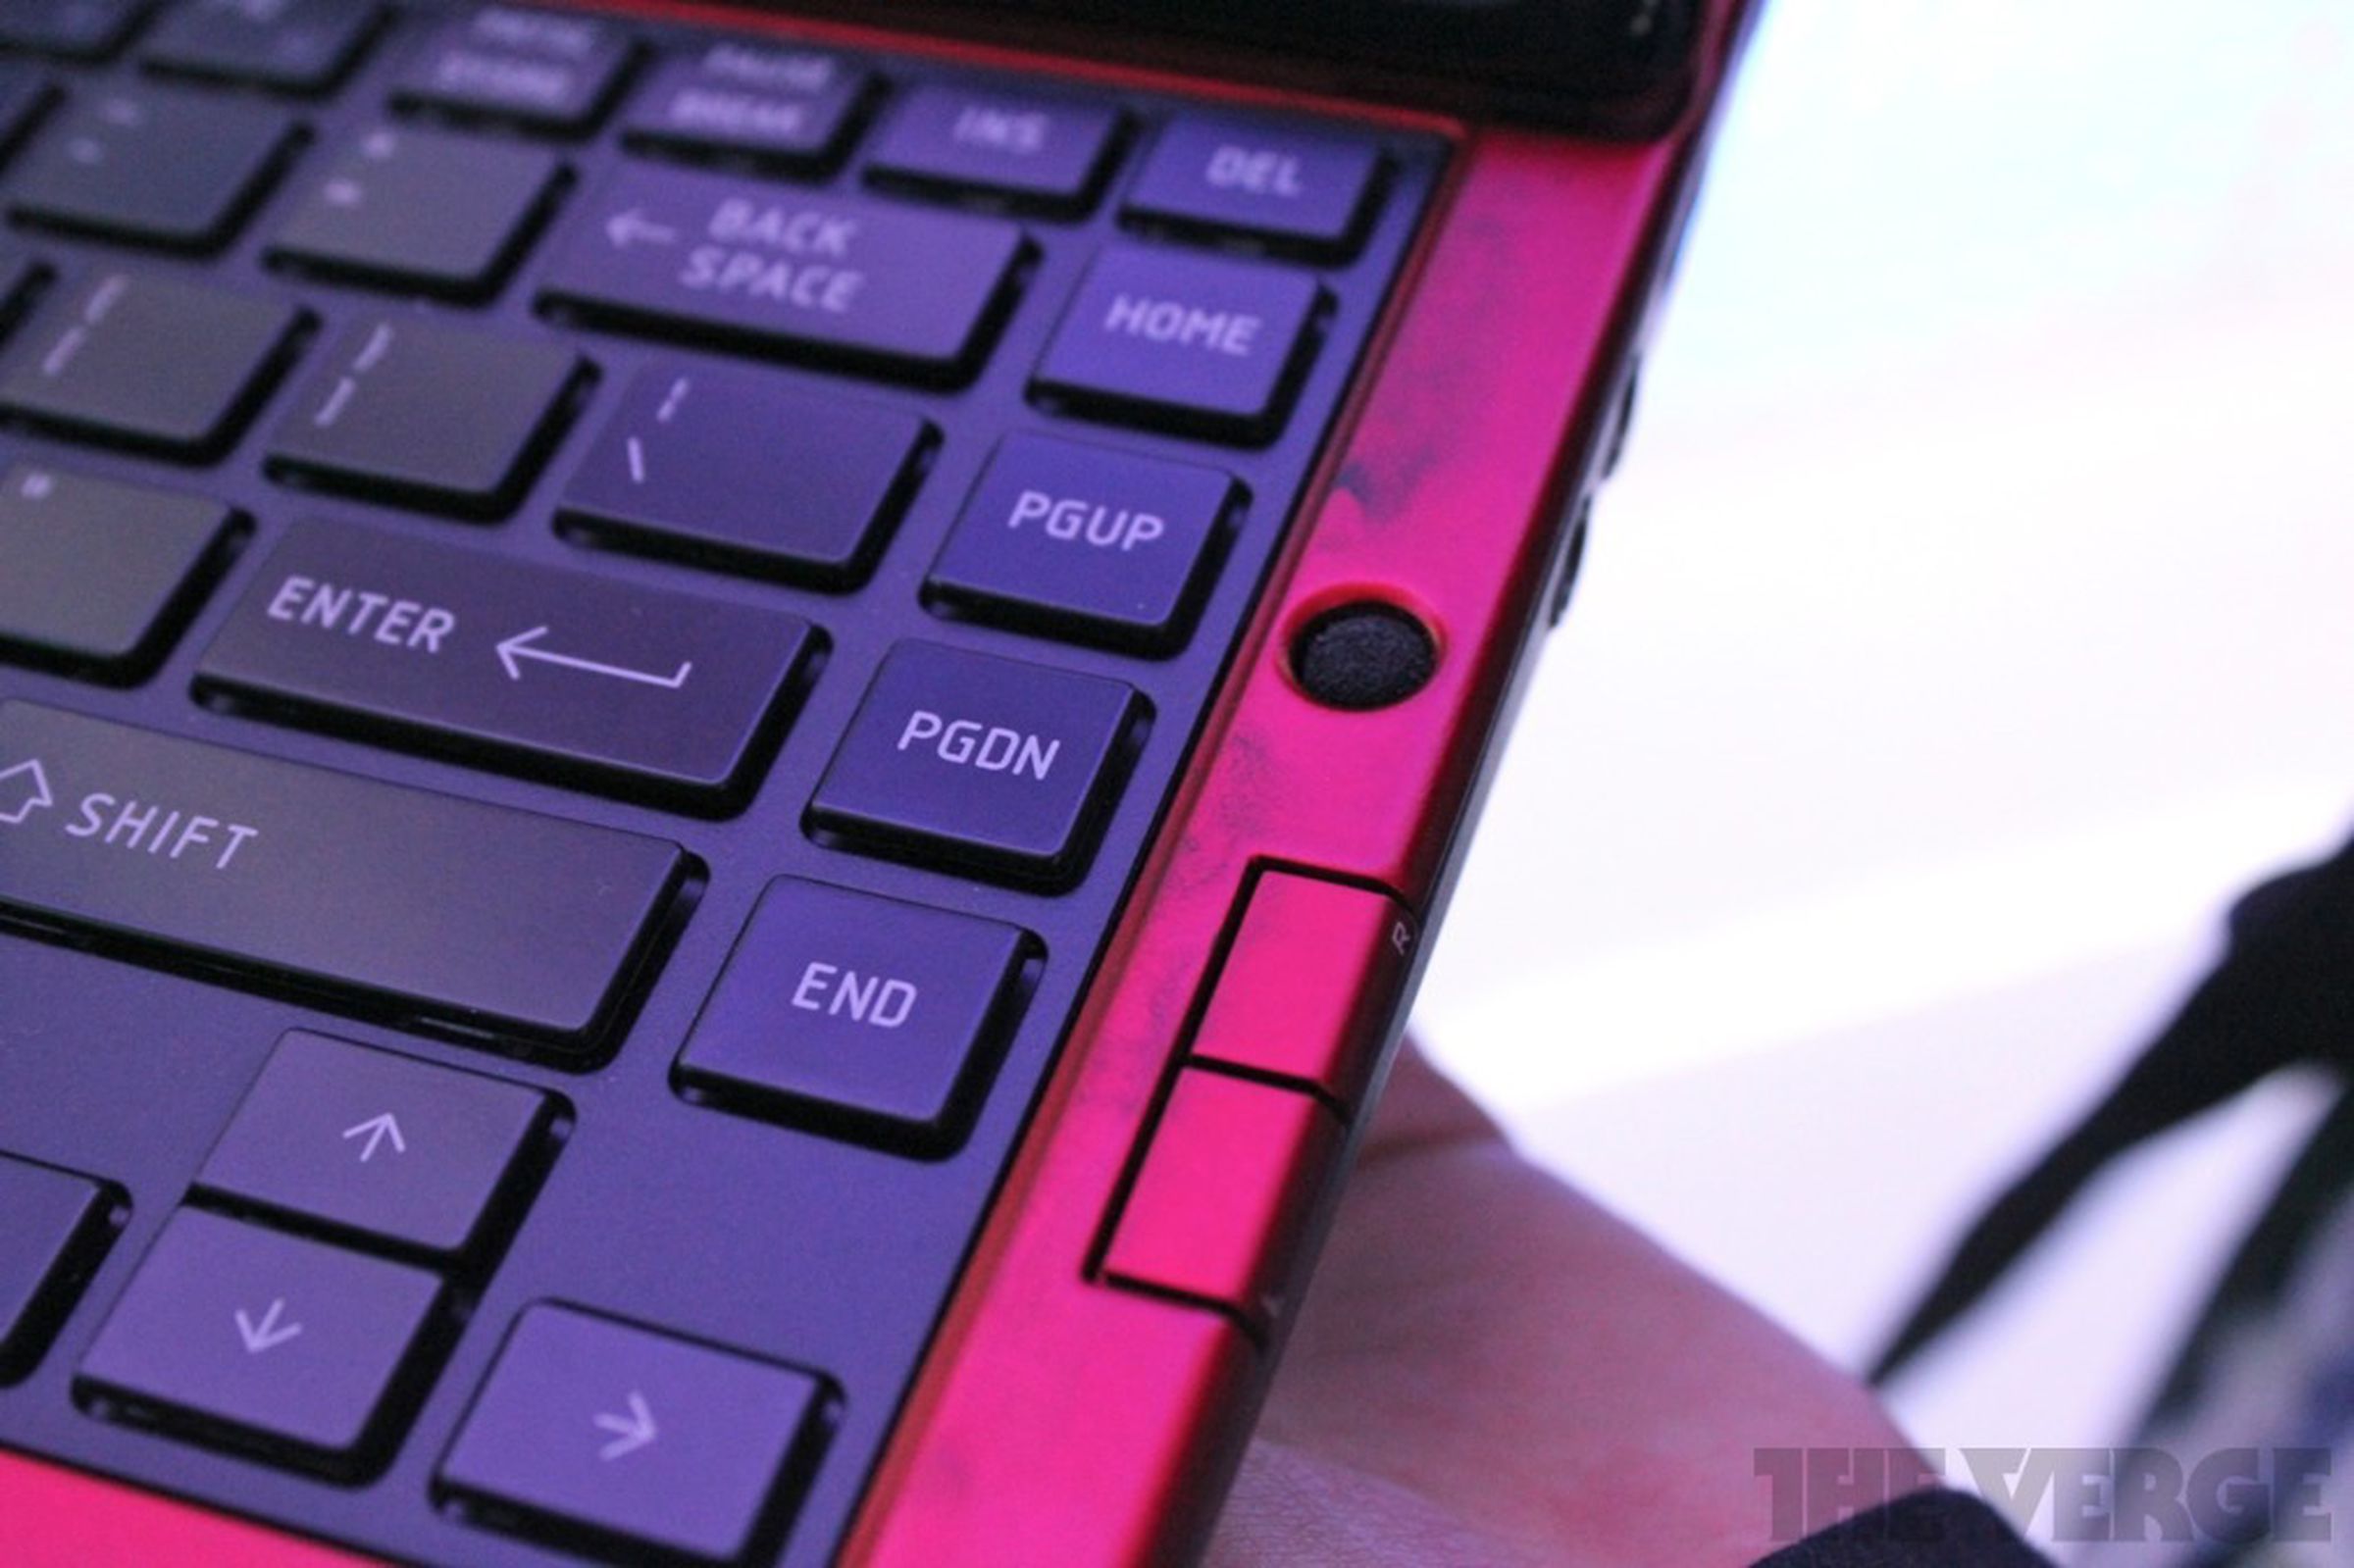 Toshiba Portege M930 hands-on pictures 